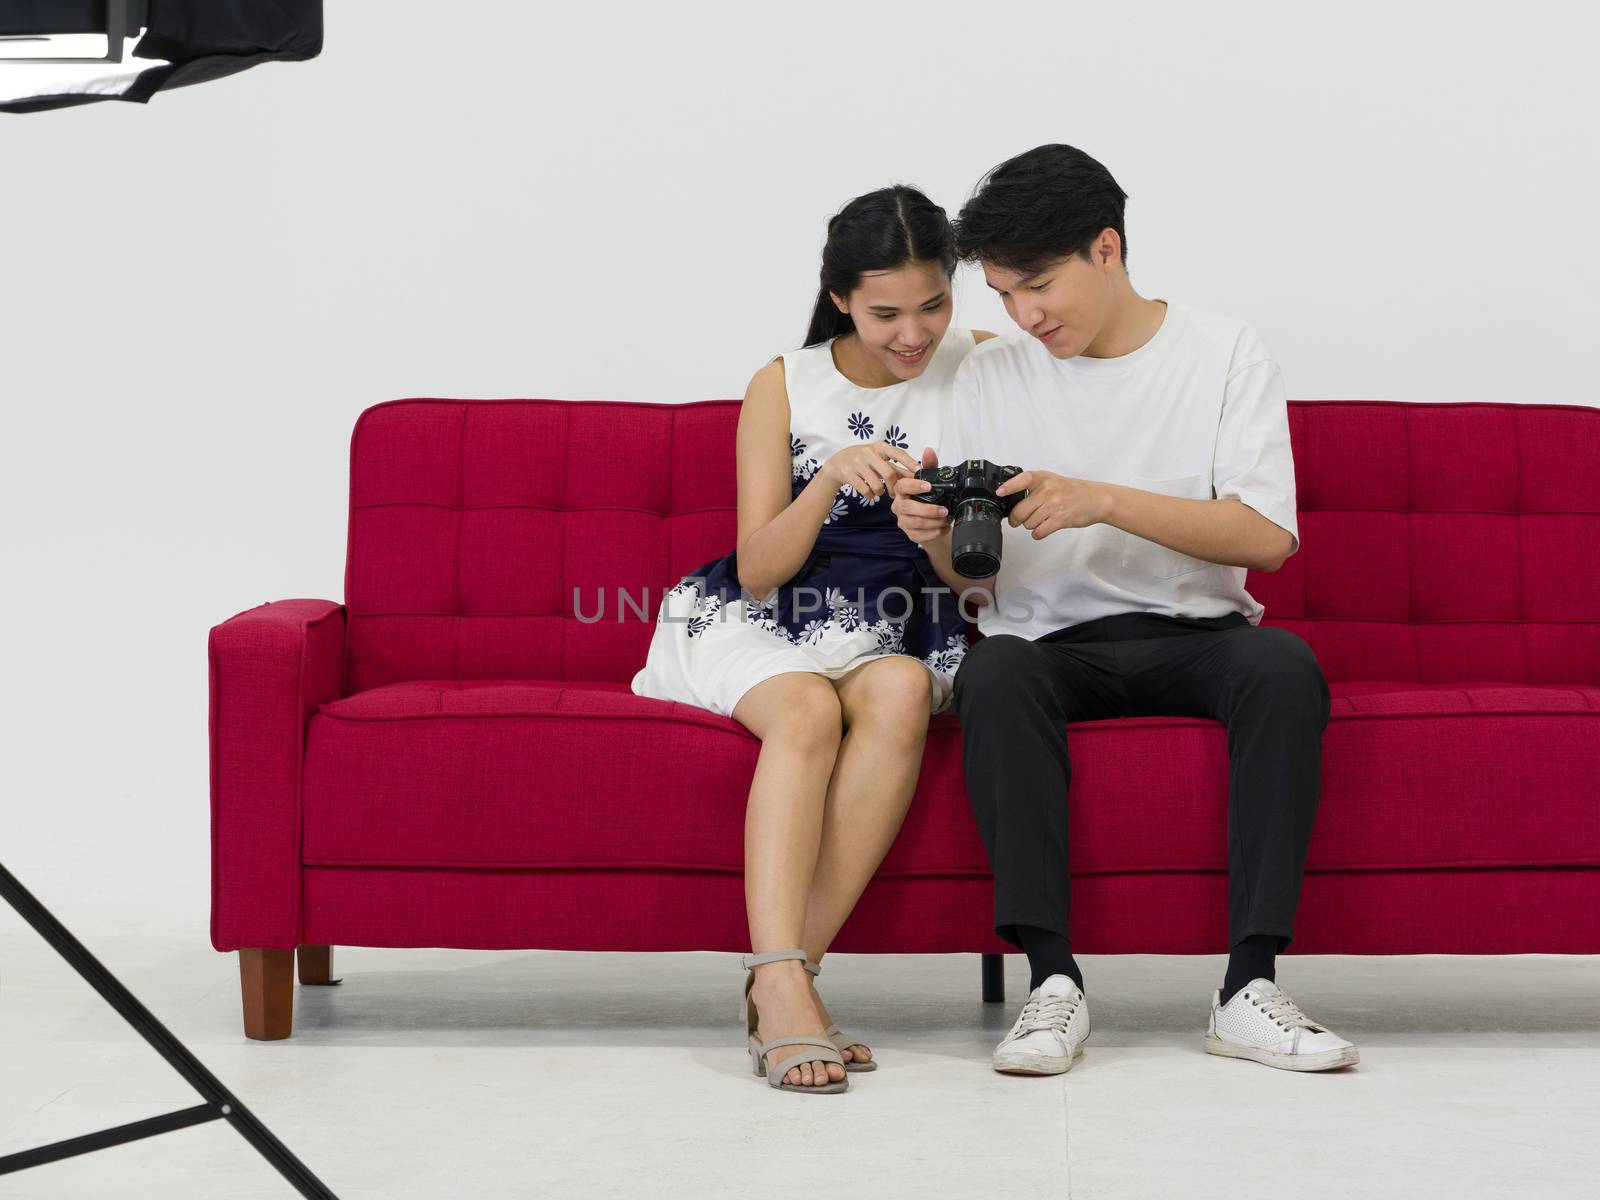 Asian photographers allow models to view pictures taken on the camera screen while sitting on a red sofa. Working atmosphere in the photo studio